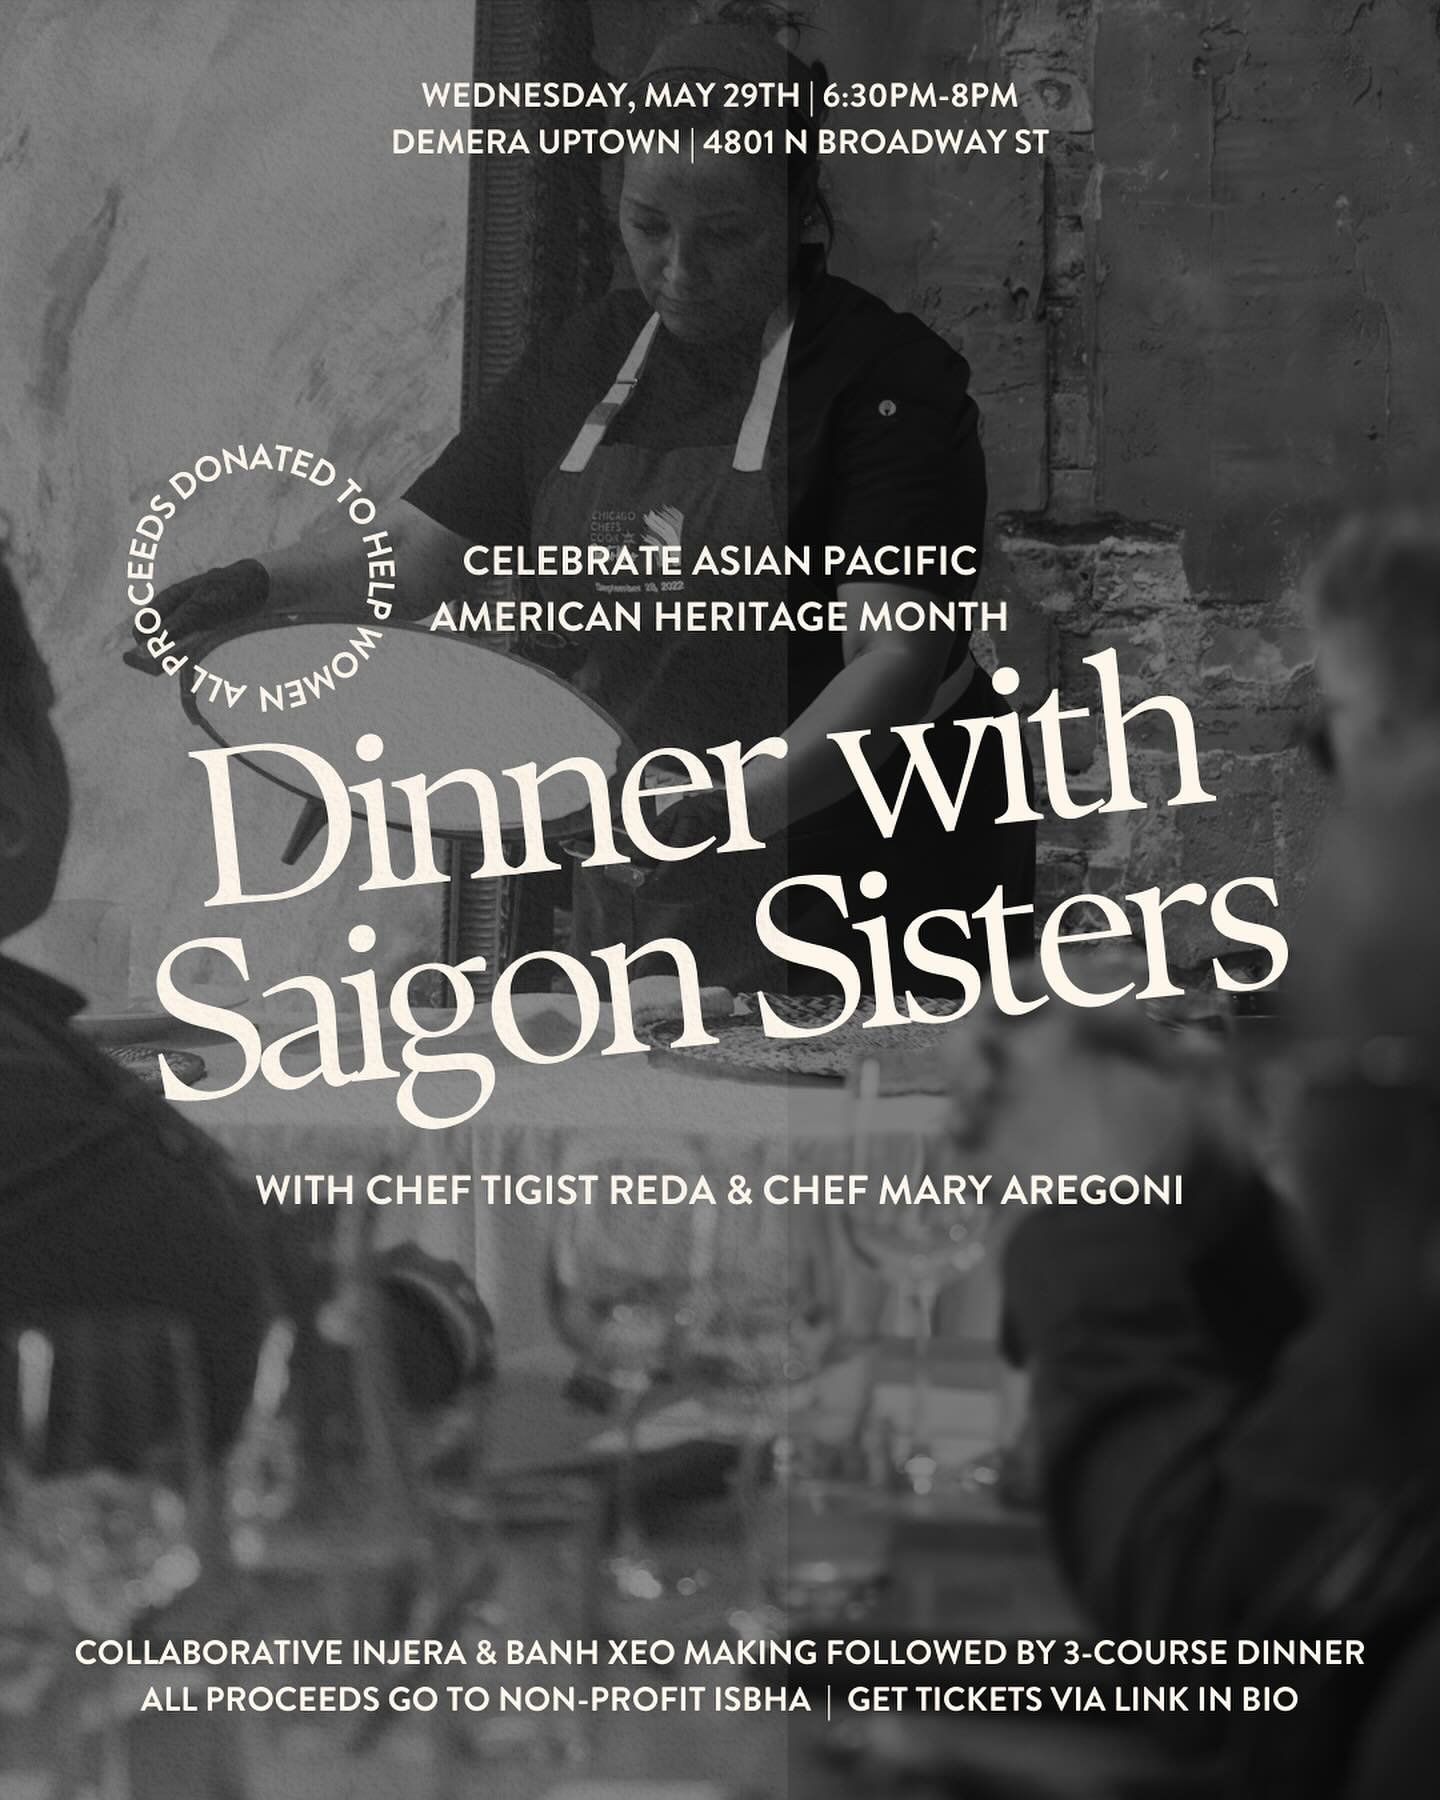 TICKETS ON SALE NOW! We&rsquo;ll be partnering with Saigon Sisters to celebrate Asian Pacific American Heritage Month on May 29th at our Uptown location!⁠
⁠
Experience a one-night-only fusion of Asian and African cultures from our chef and owner @tig